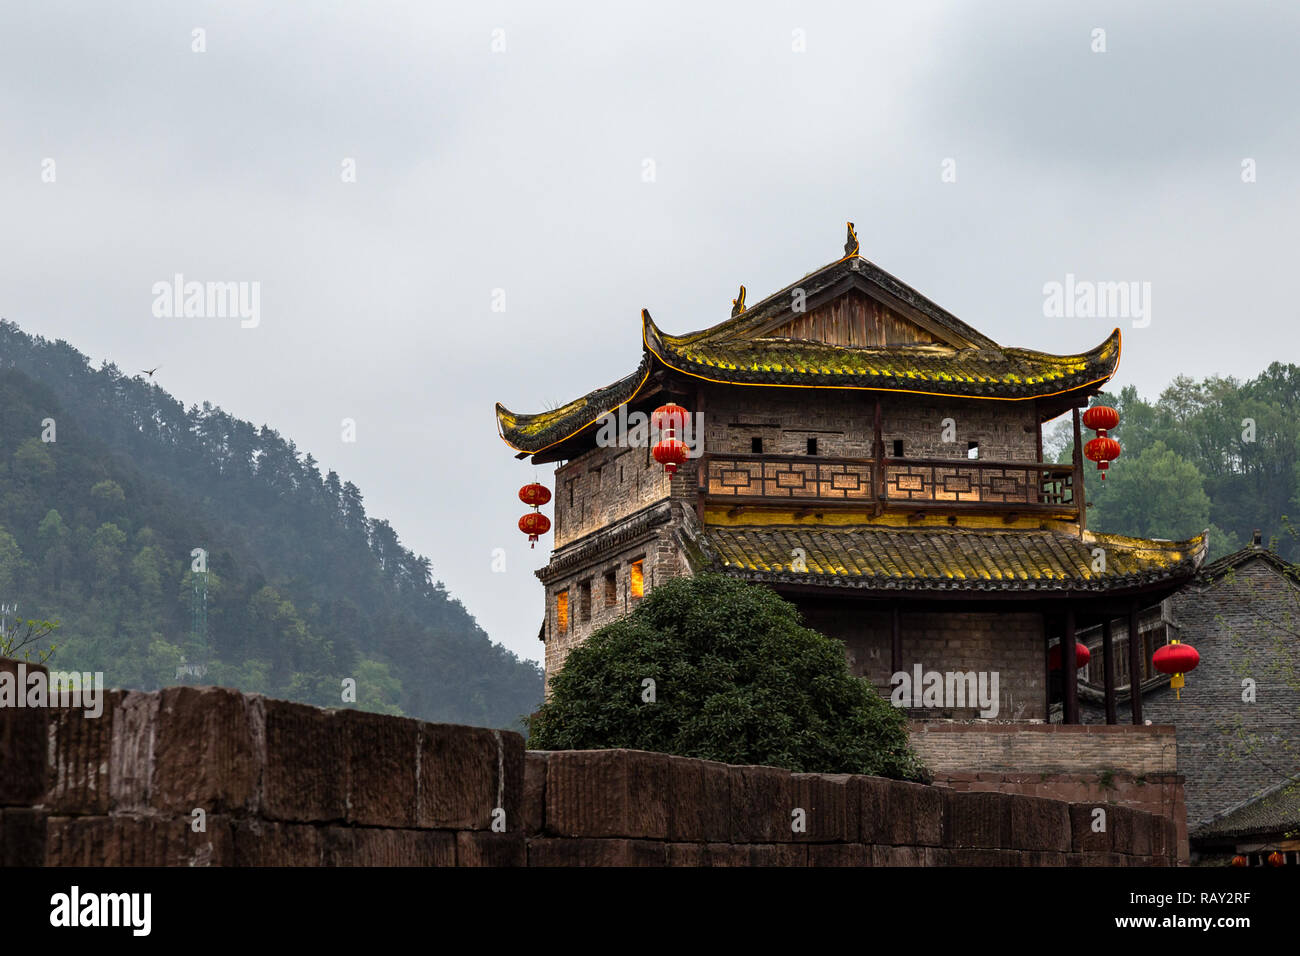 Northern Door Tower in Fenghuang Ancient town, Hunan province, China. This ancient town was added to the UNESCO World Heritage Tentative List in the C Stock Photo